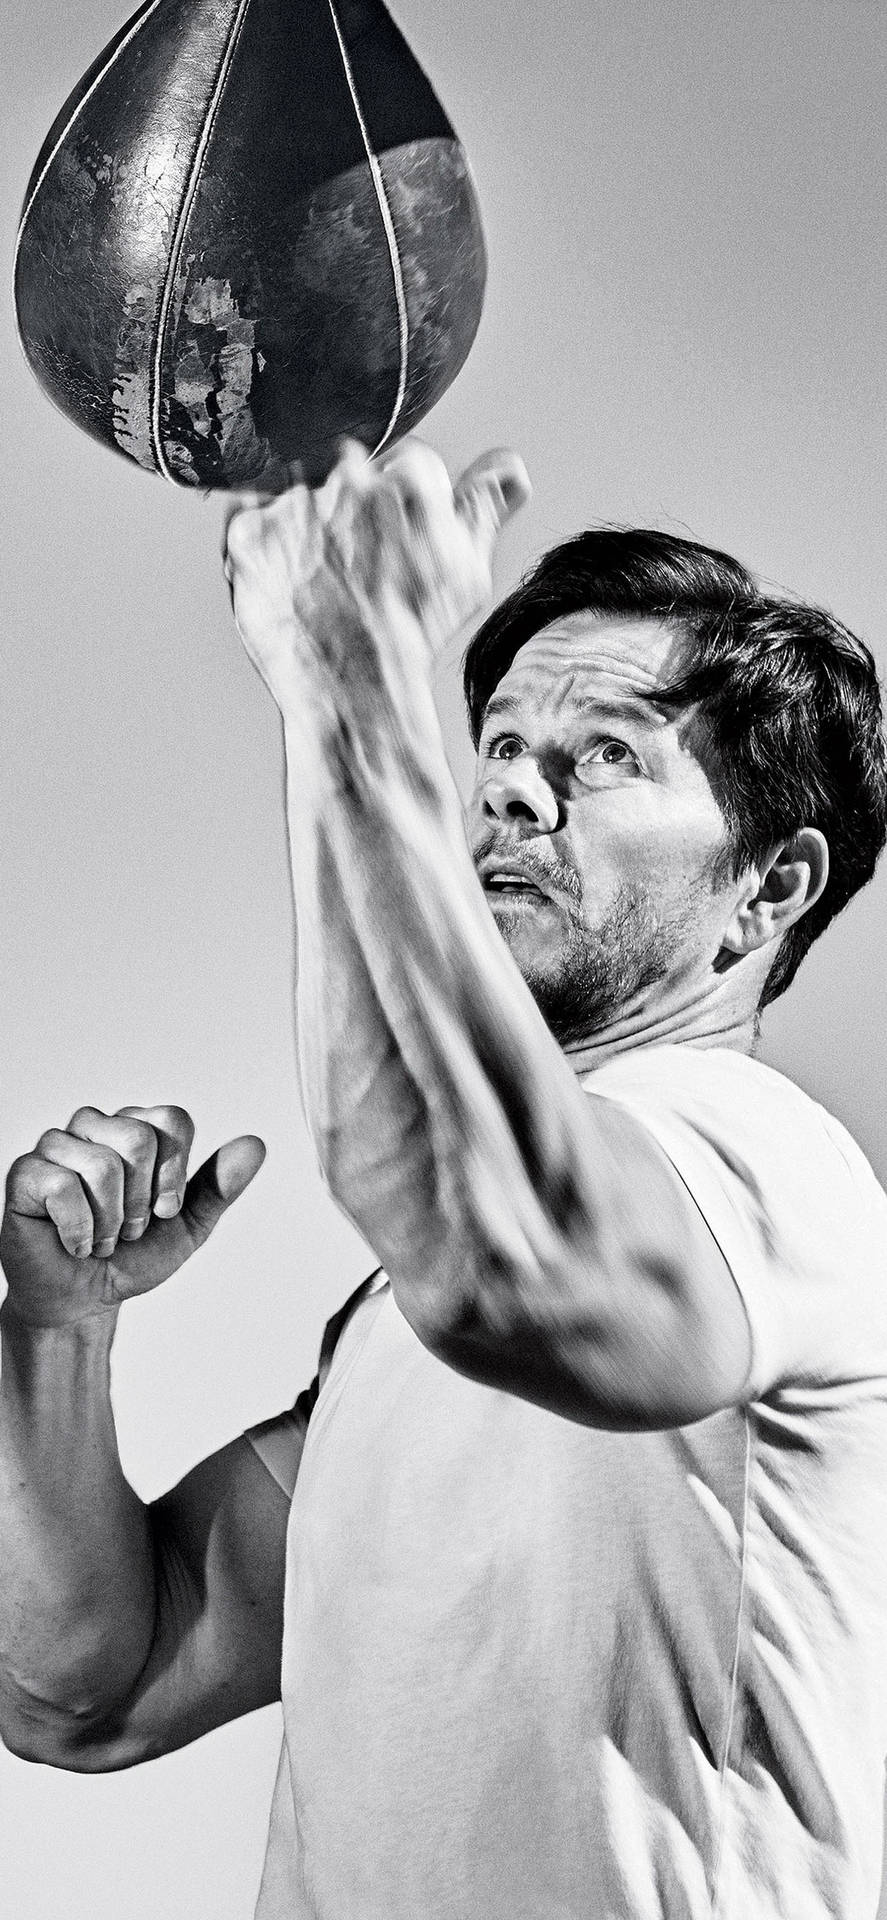 Boxing Mark Wahlberg In Black & White Background